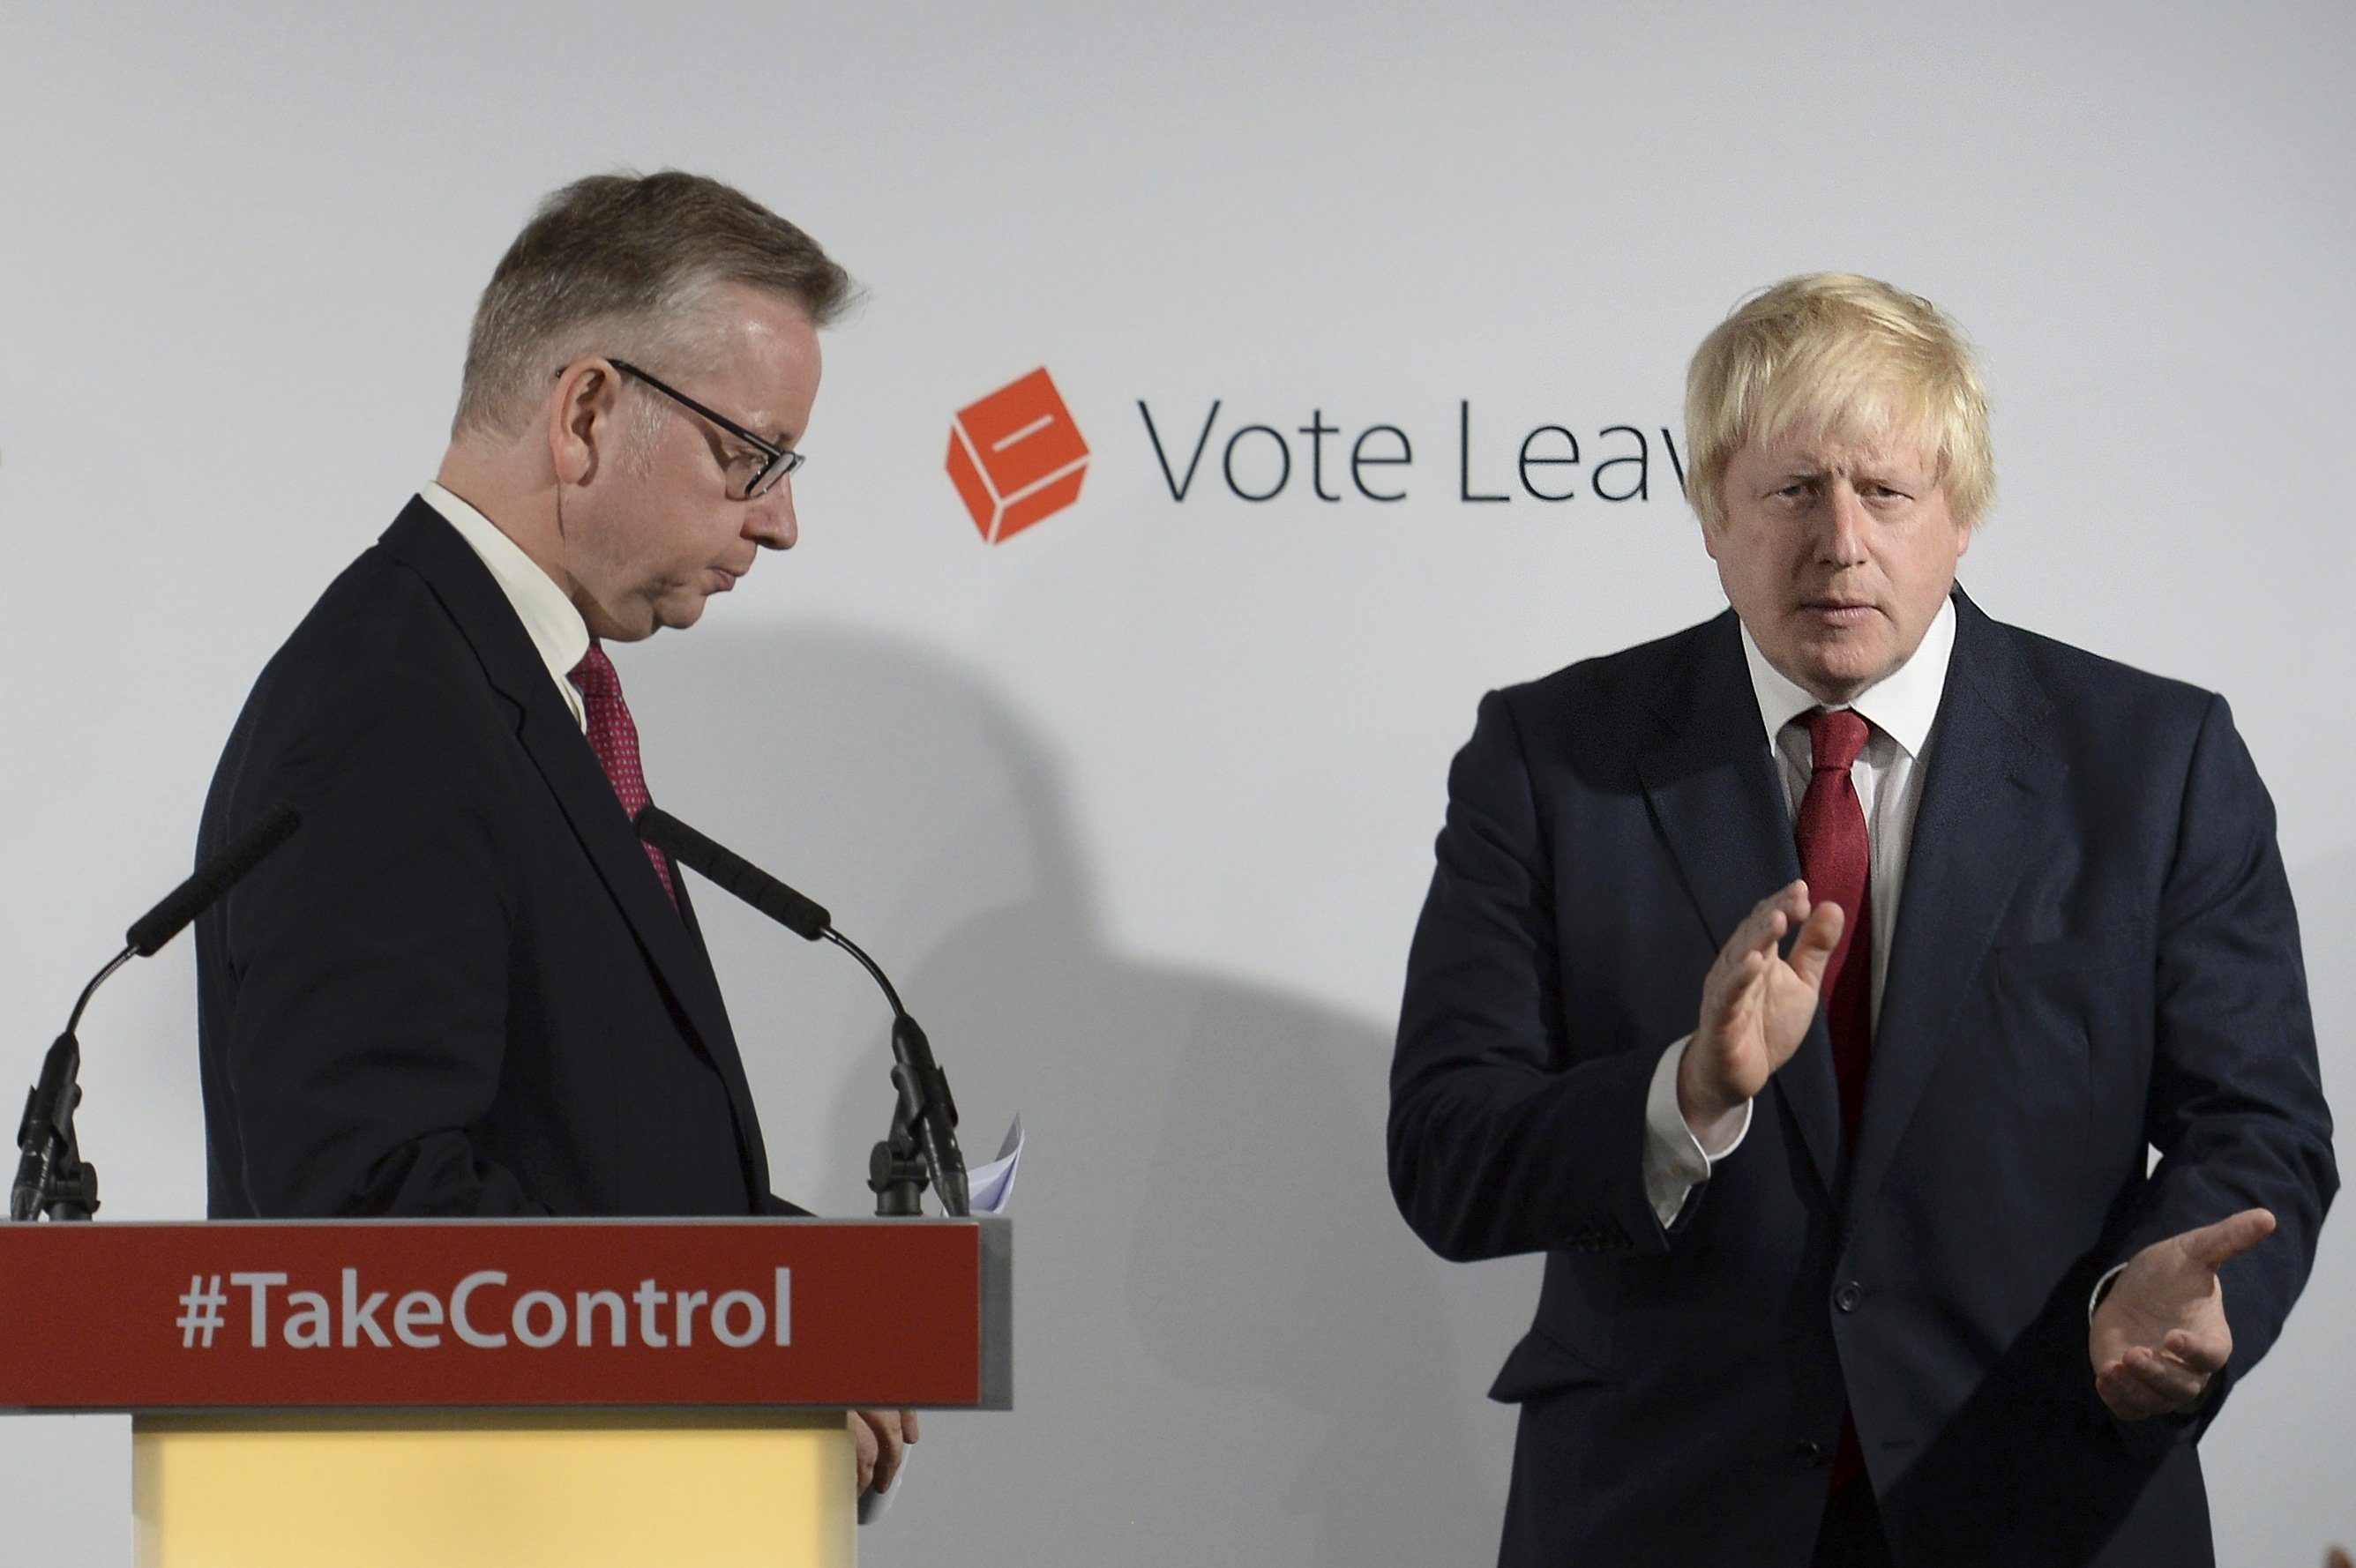 Britain's Justice Secretary Michael Gove (L) finishes speaking as Vote Leave campaign leader Boris Johnson applauds at the group's headquarters in London, Britain June 24, 2016.